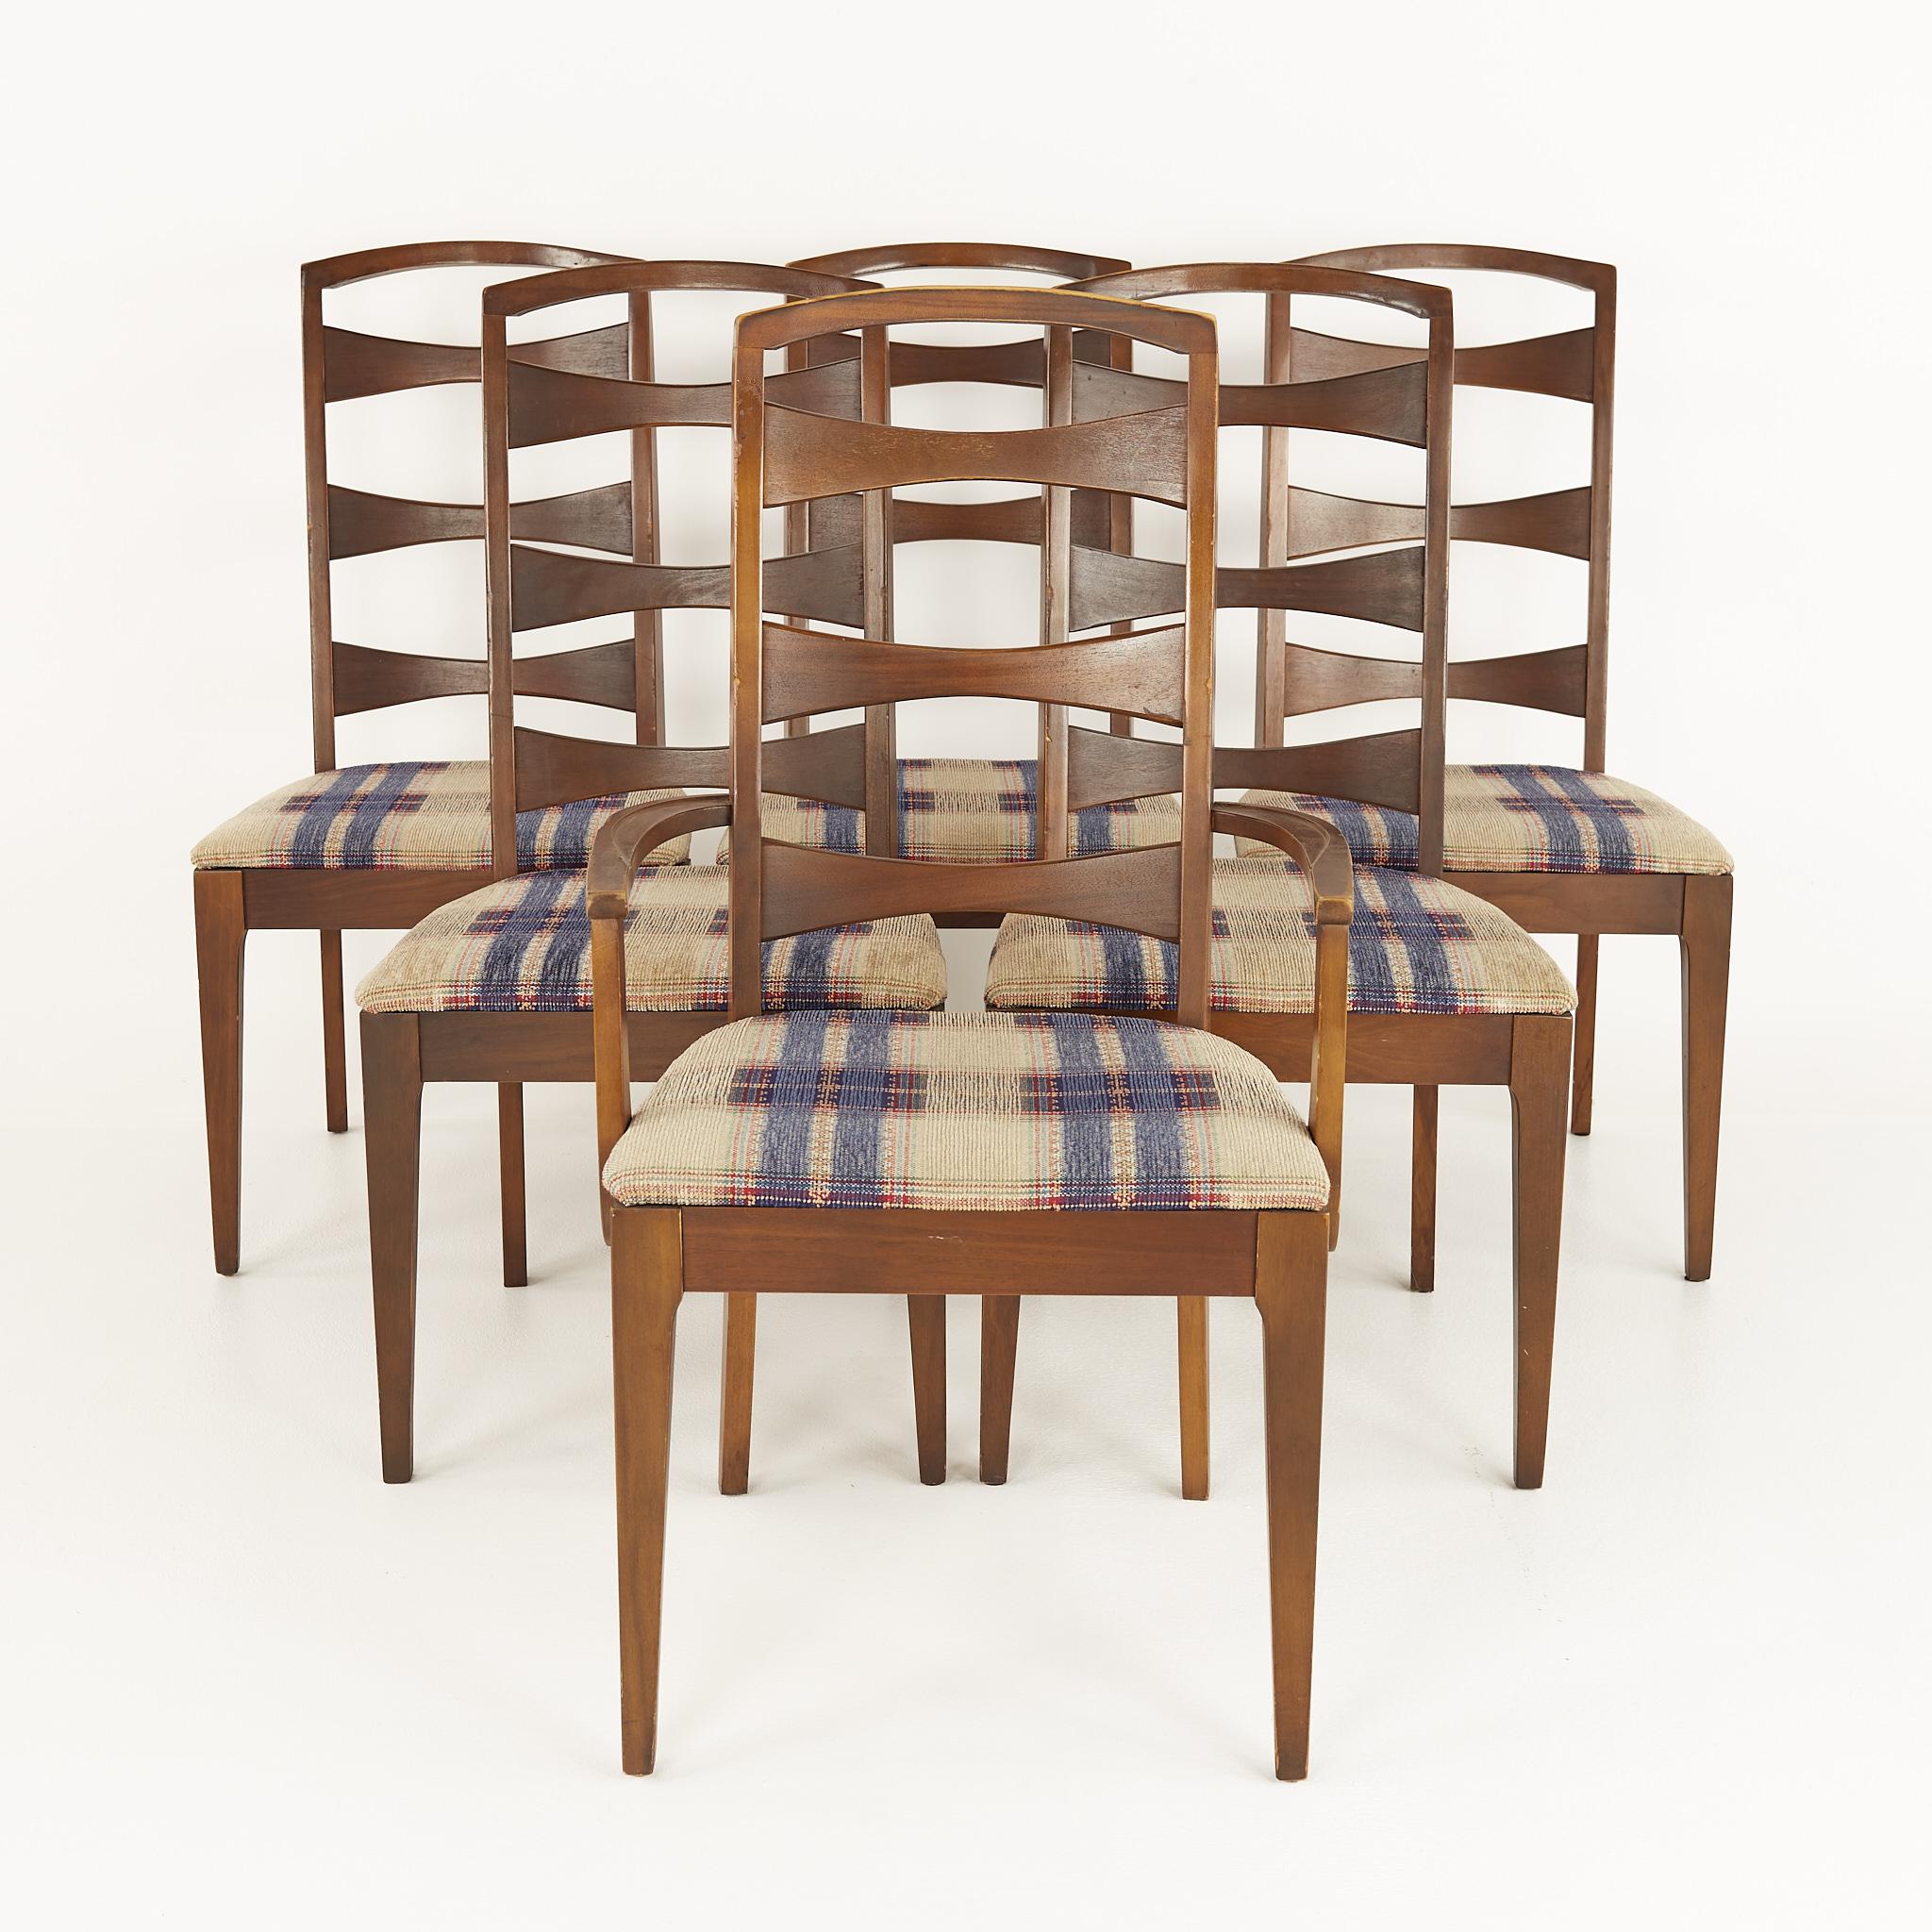 Lenoir House mid century walnut ladder back dining chairs - set of 6

These chairs measure: 20 wide x 21 deep x 41 inches high, with a seat height of 18.25 and arm height of 25.5 inches

?All pieces of furniture can be had in what we call